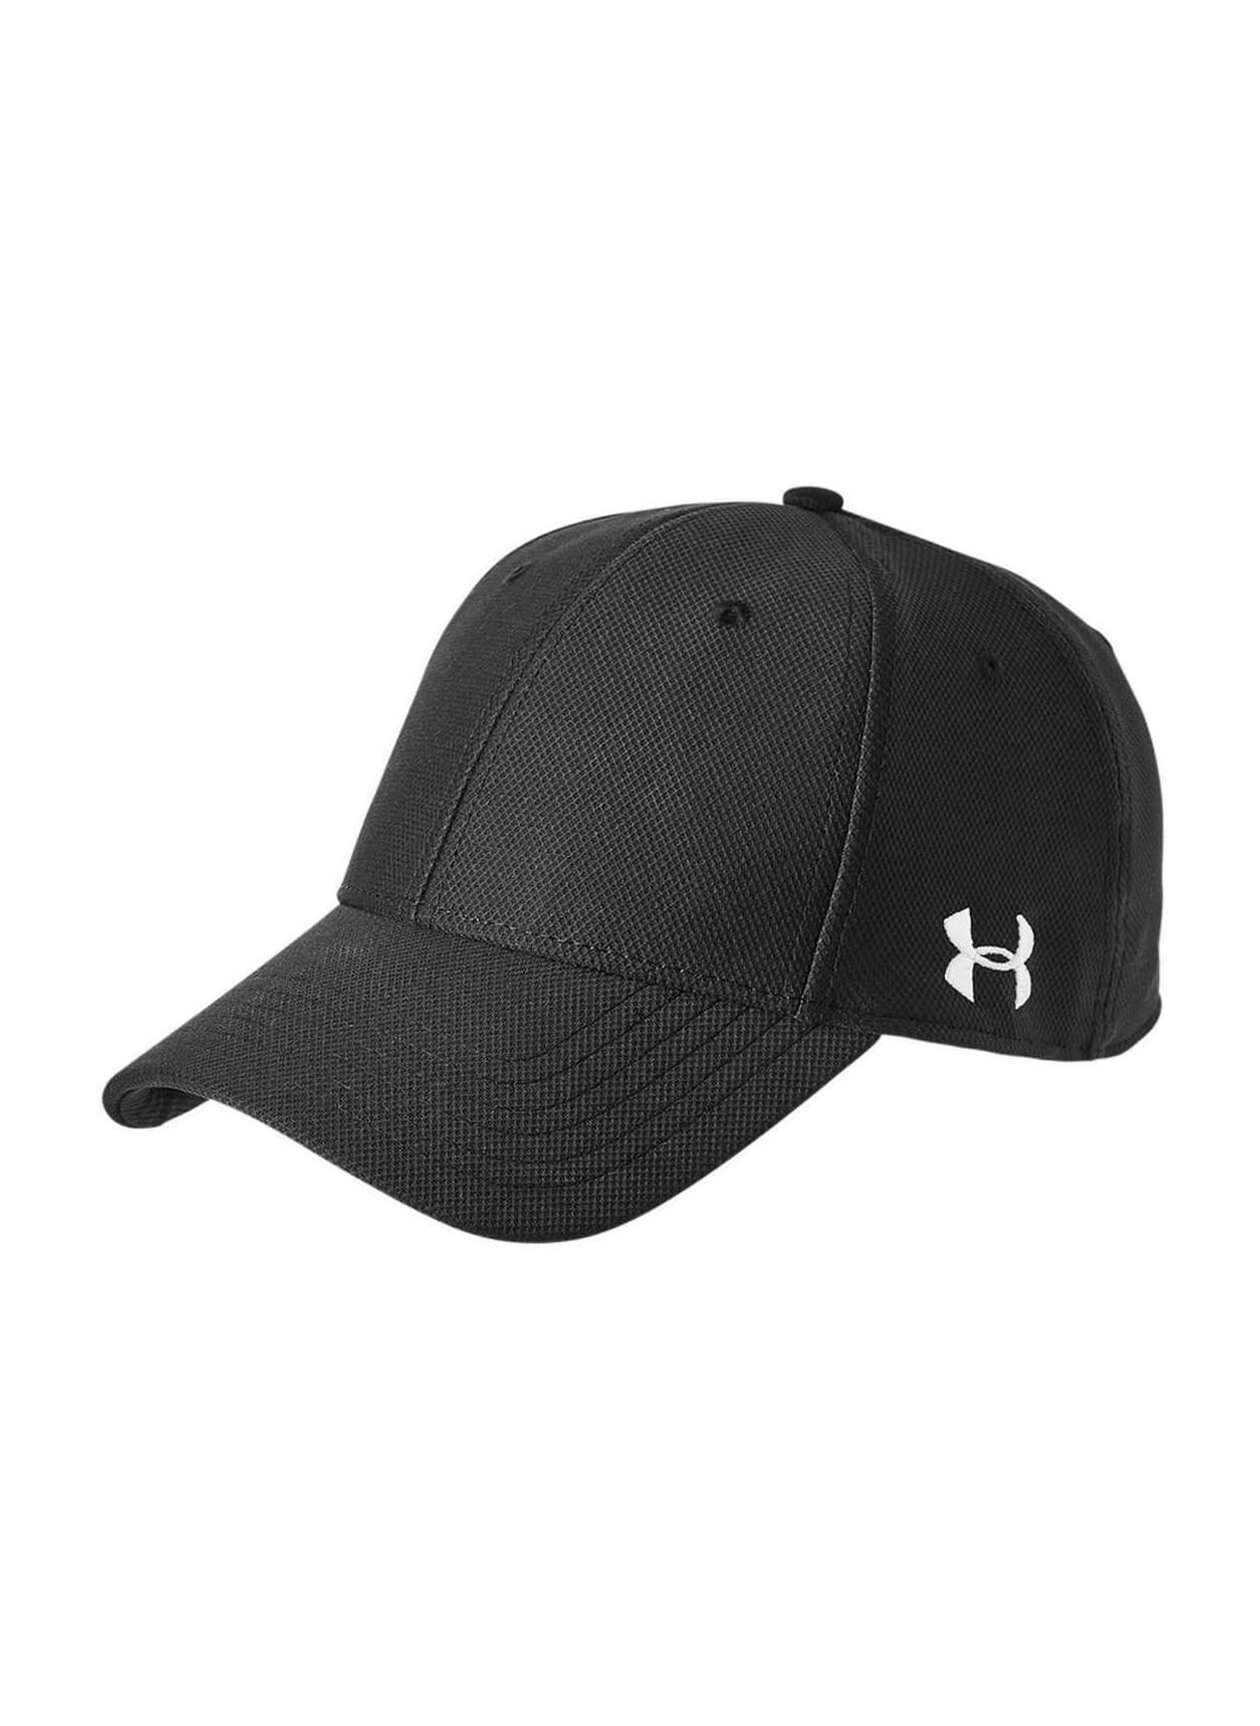 Under Armour Black Blitzing Curved Hat